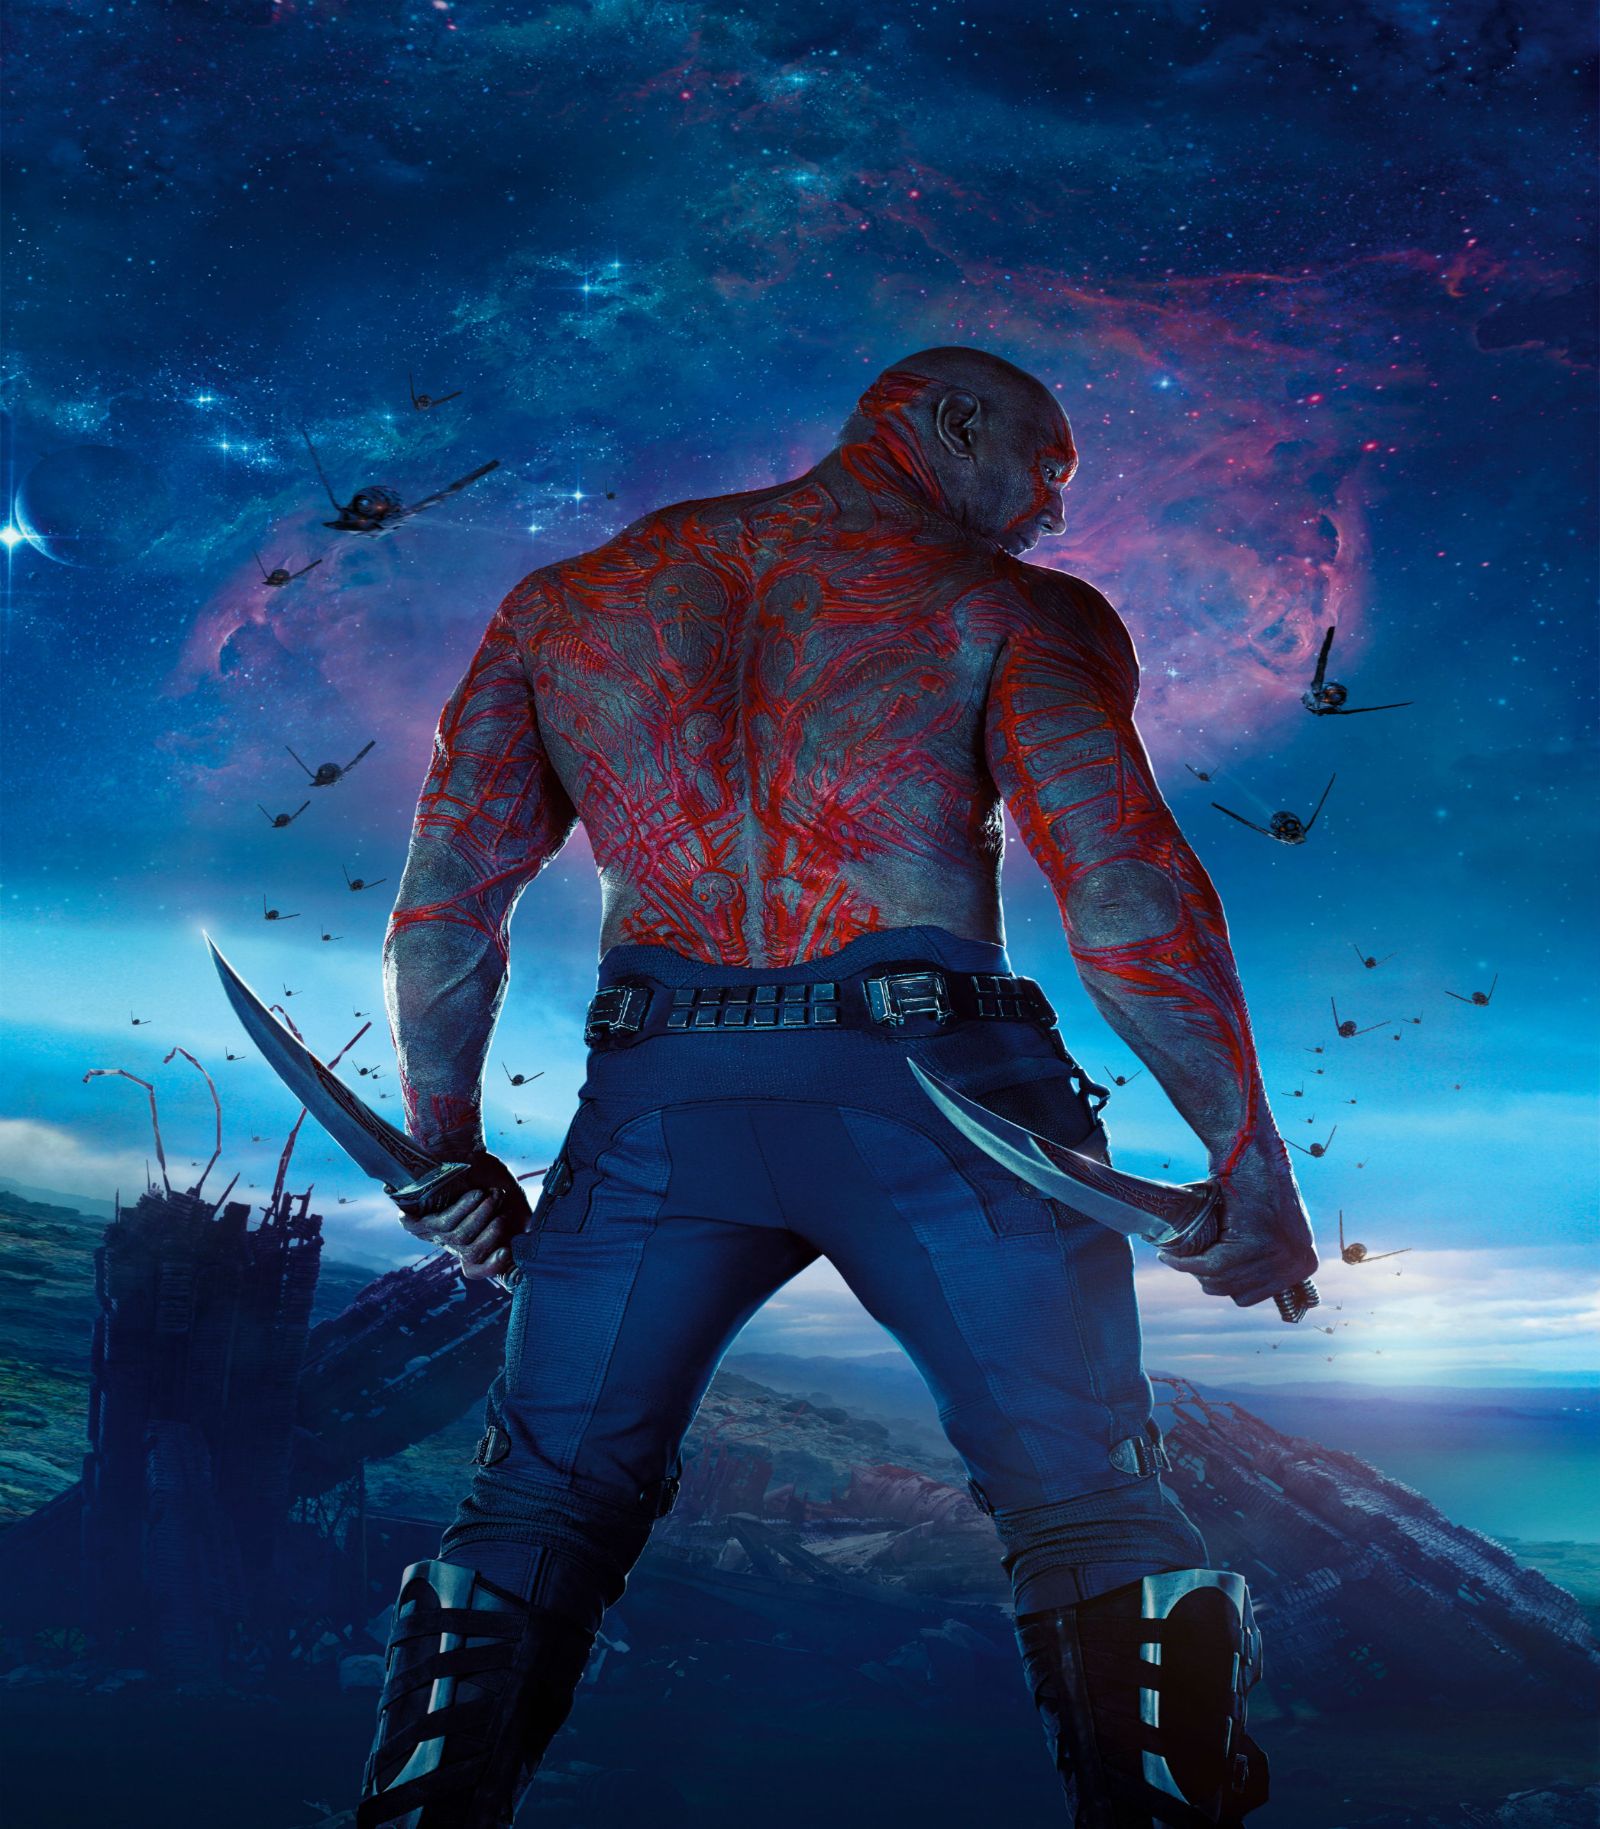 Poster of Dave Bautista as Drax from Guardians of the Galaxy